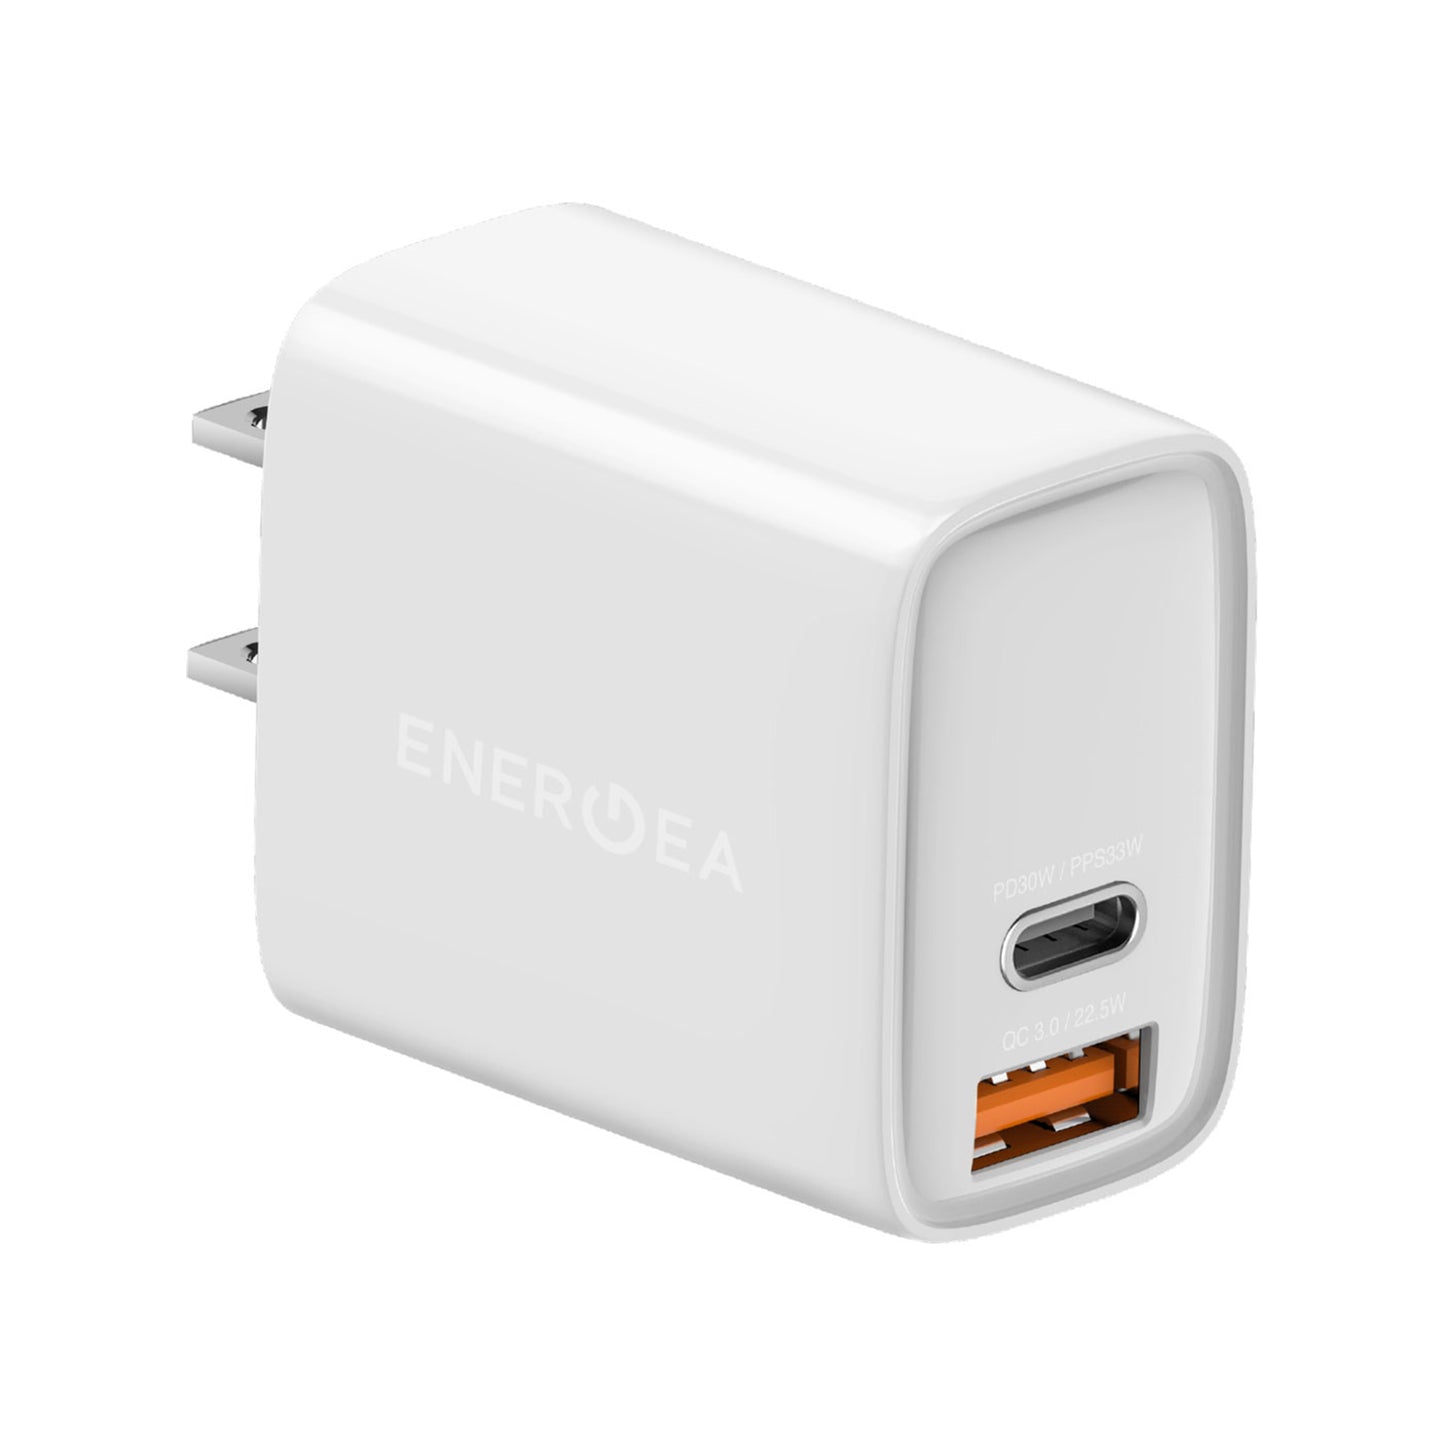 ENERGEA AmpCharge PS33 Pro Wall Charger - White